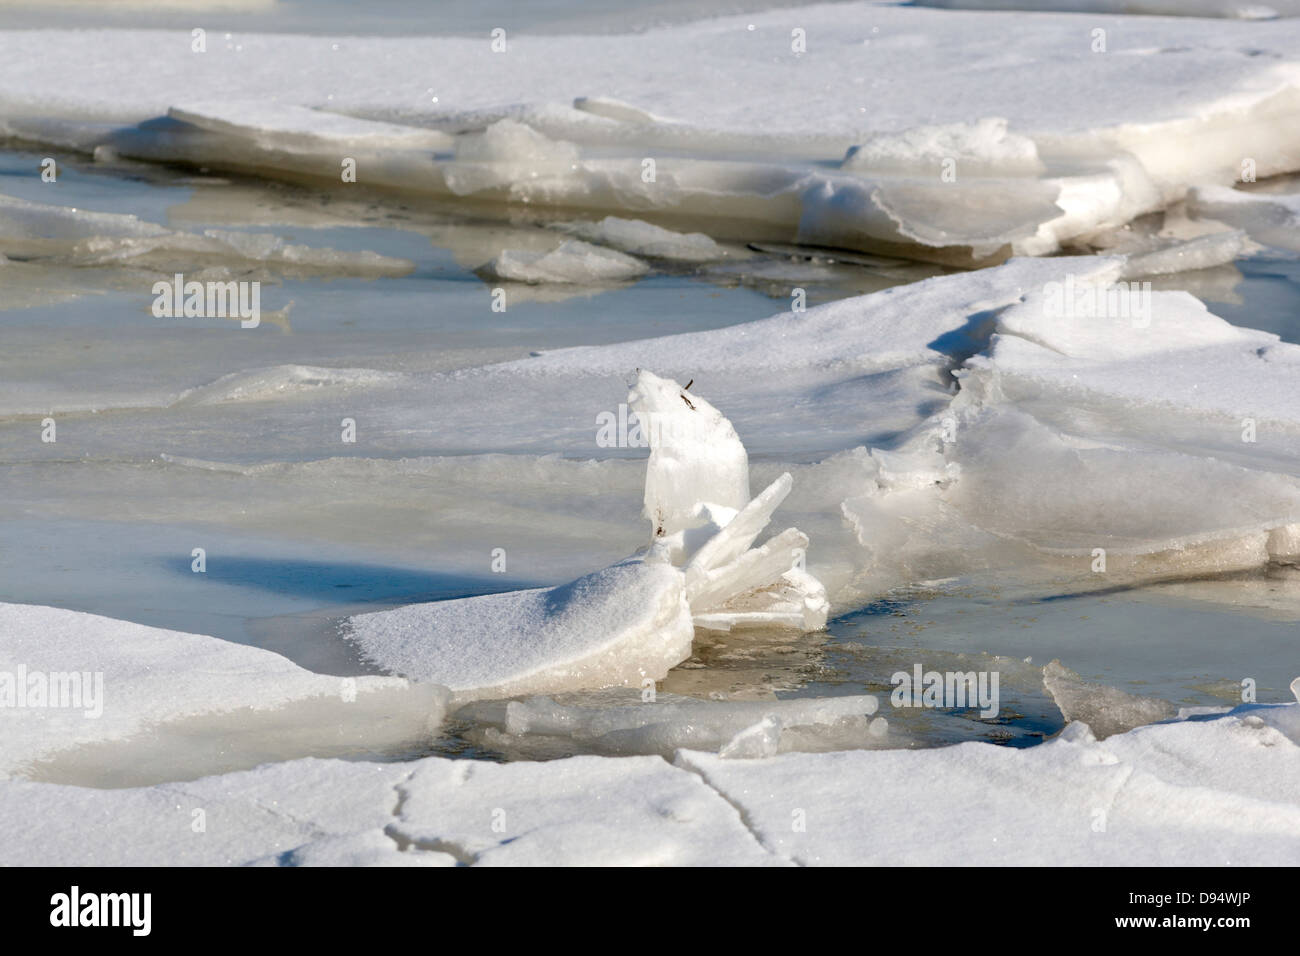 A close view of several thick ice floes that are cracking. Stock Photo